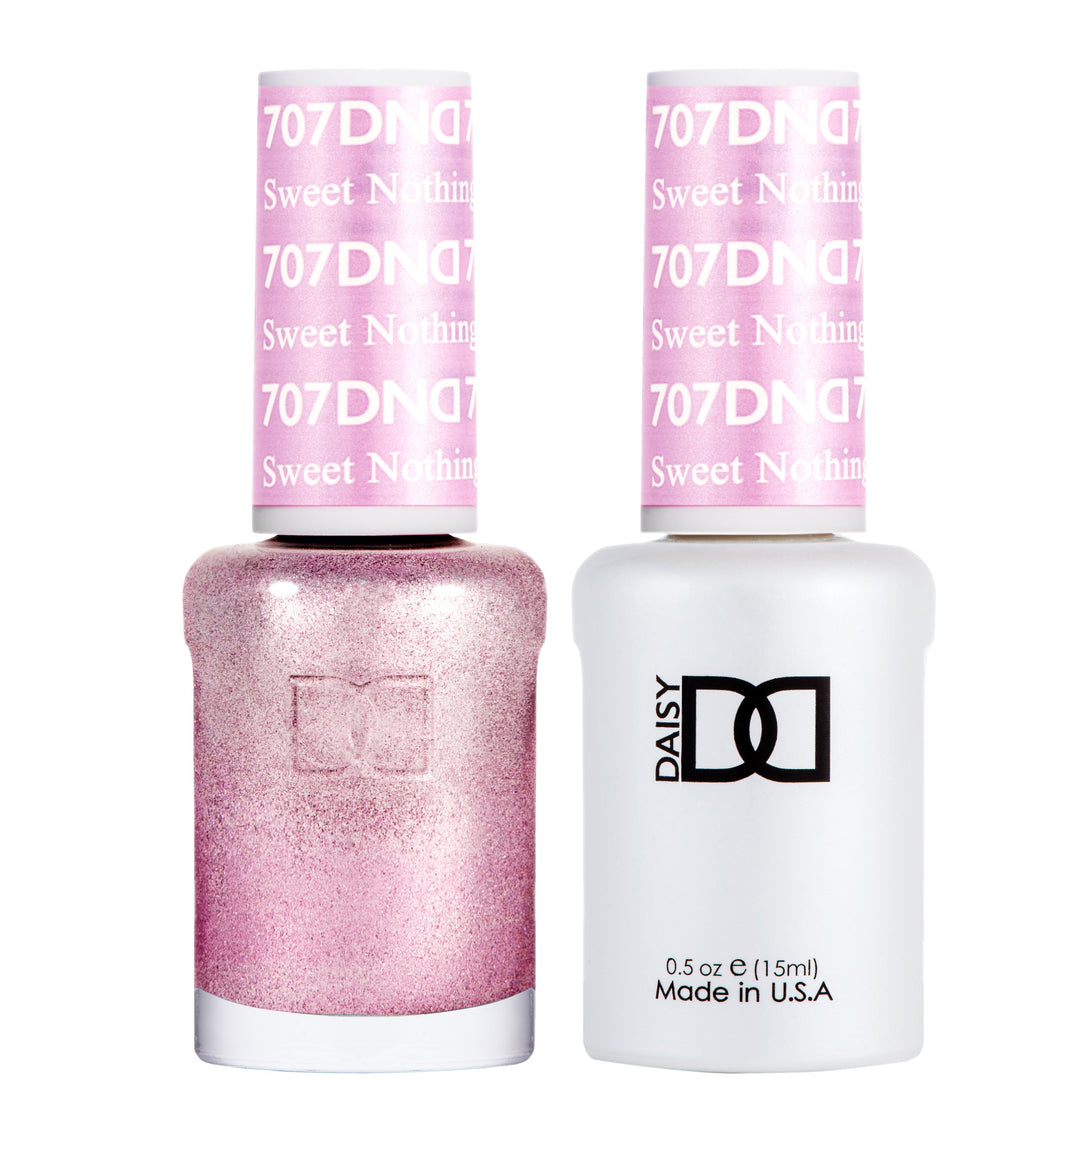 DND DUO Nail Lacquer and UV|LED Gel Polish Sweet Nothing 707 (2 x 15ml)